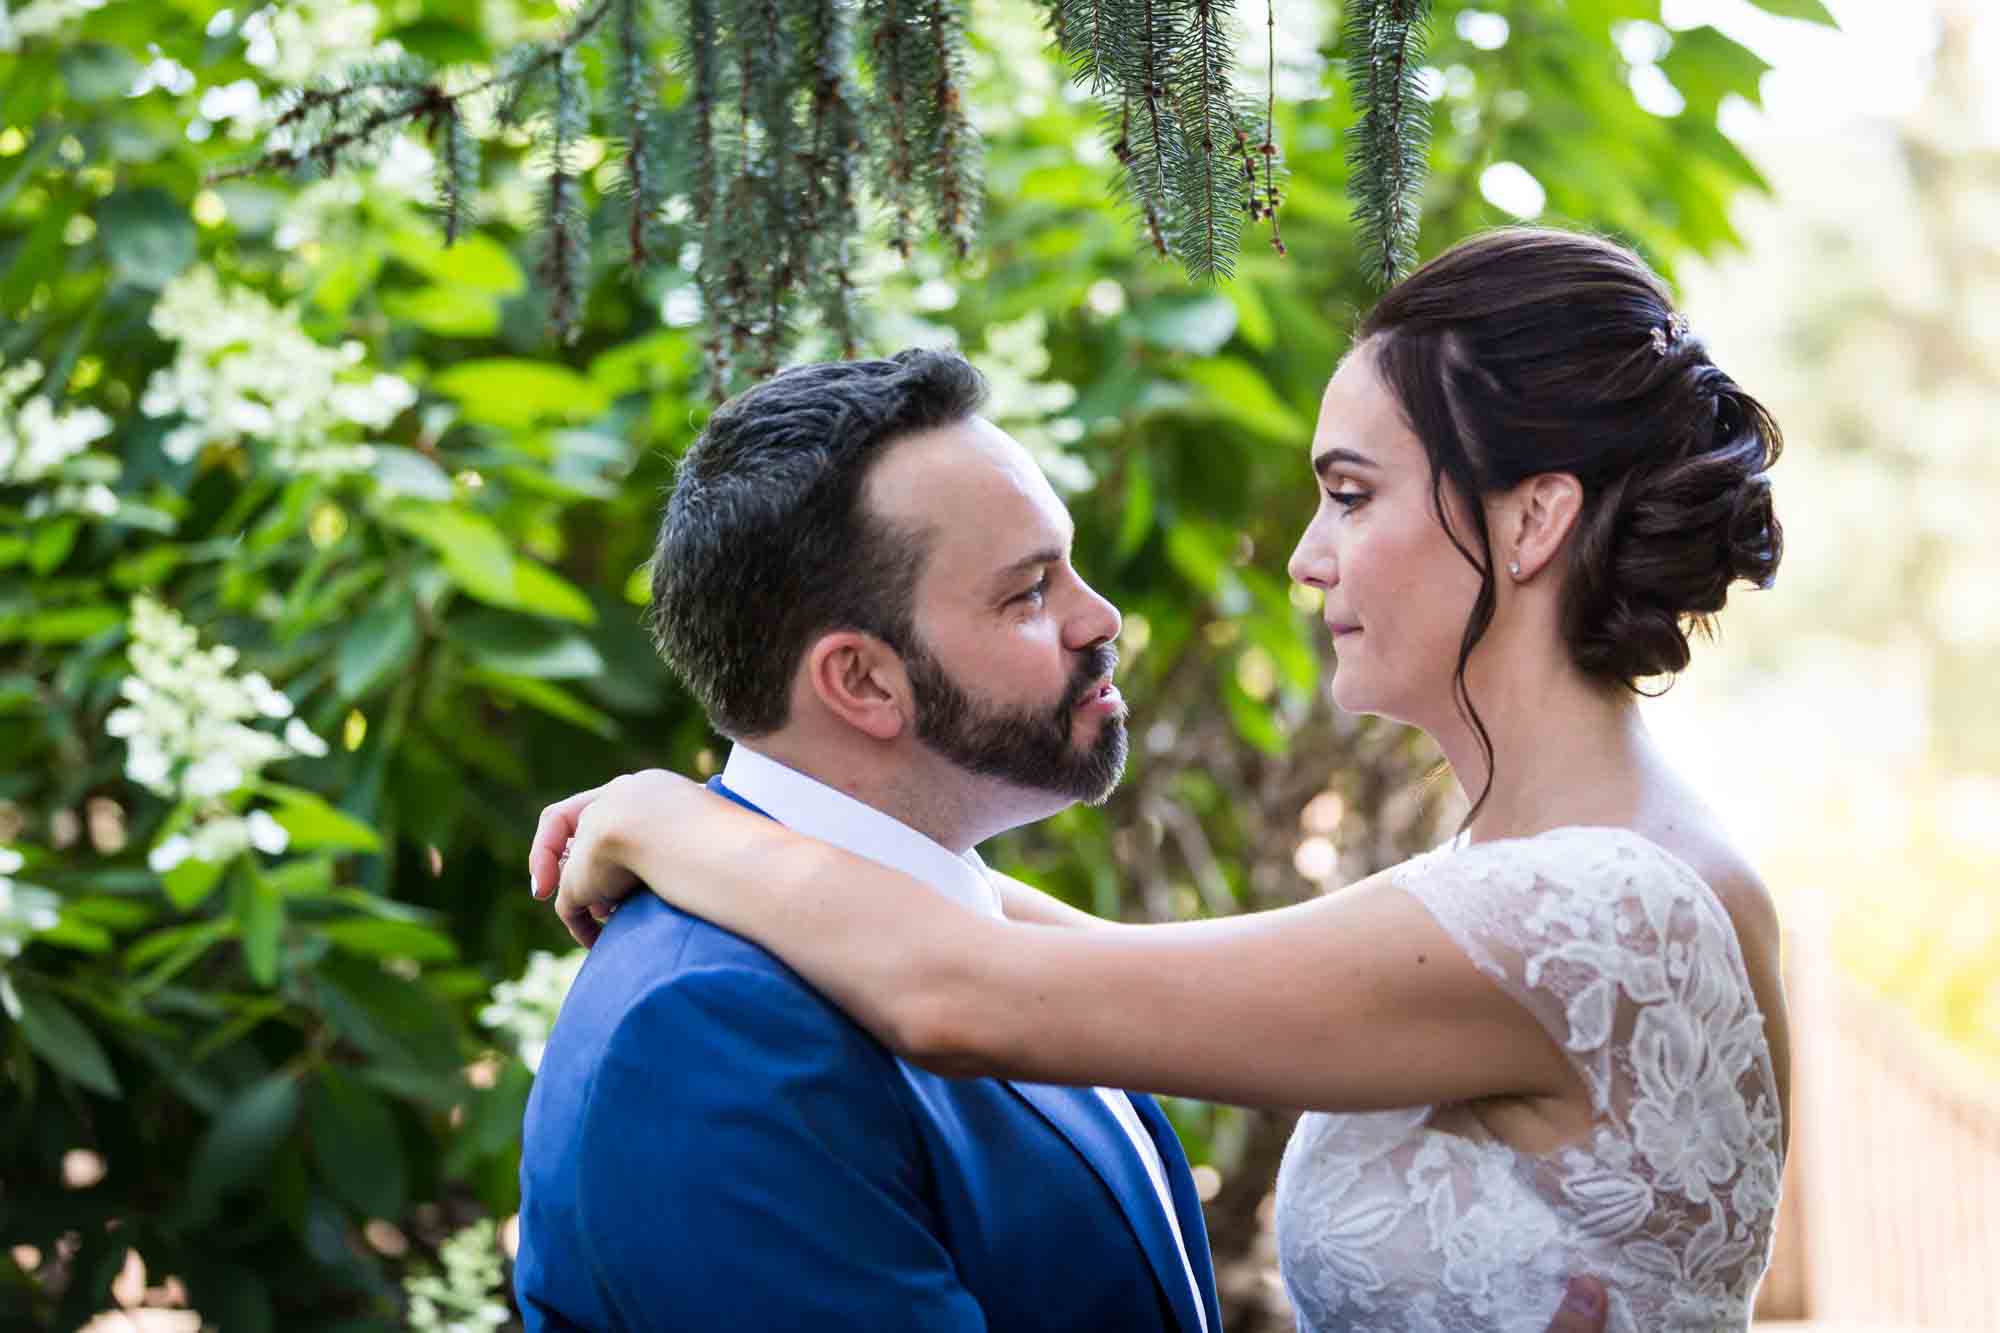 Bride and groom hugging in front of green bushes and white flowers for an article on how to find a San Antonio wedding photographer